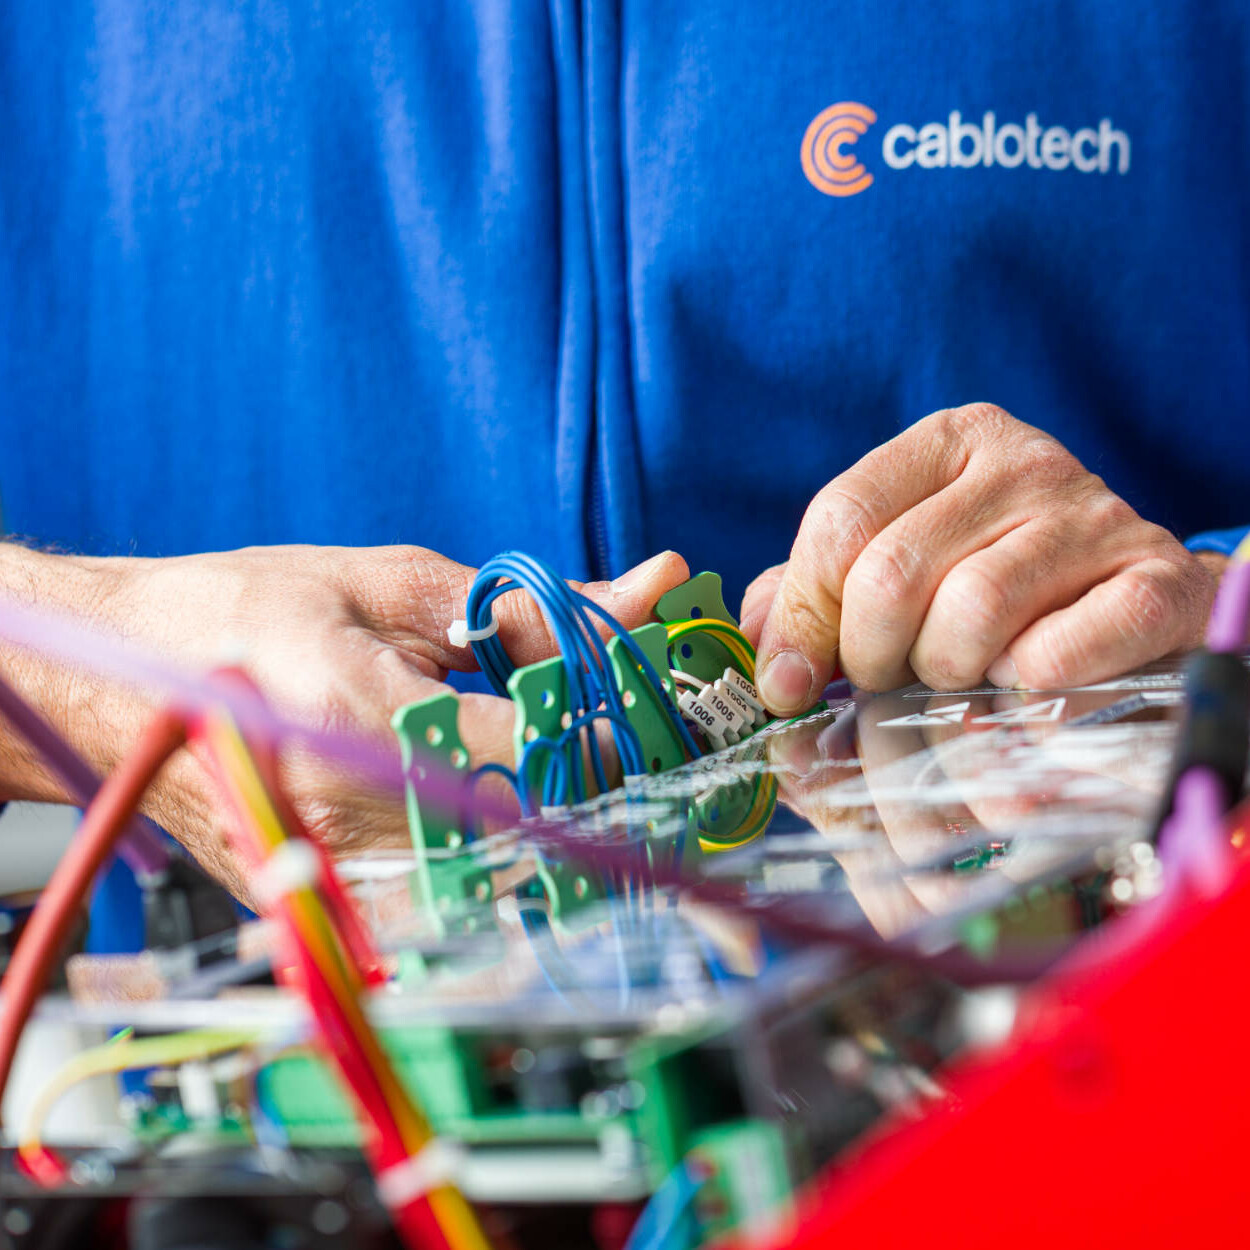 Industrial Electromechanical Assembly - Cablotech